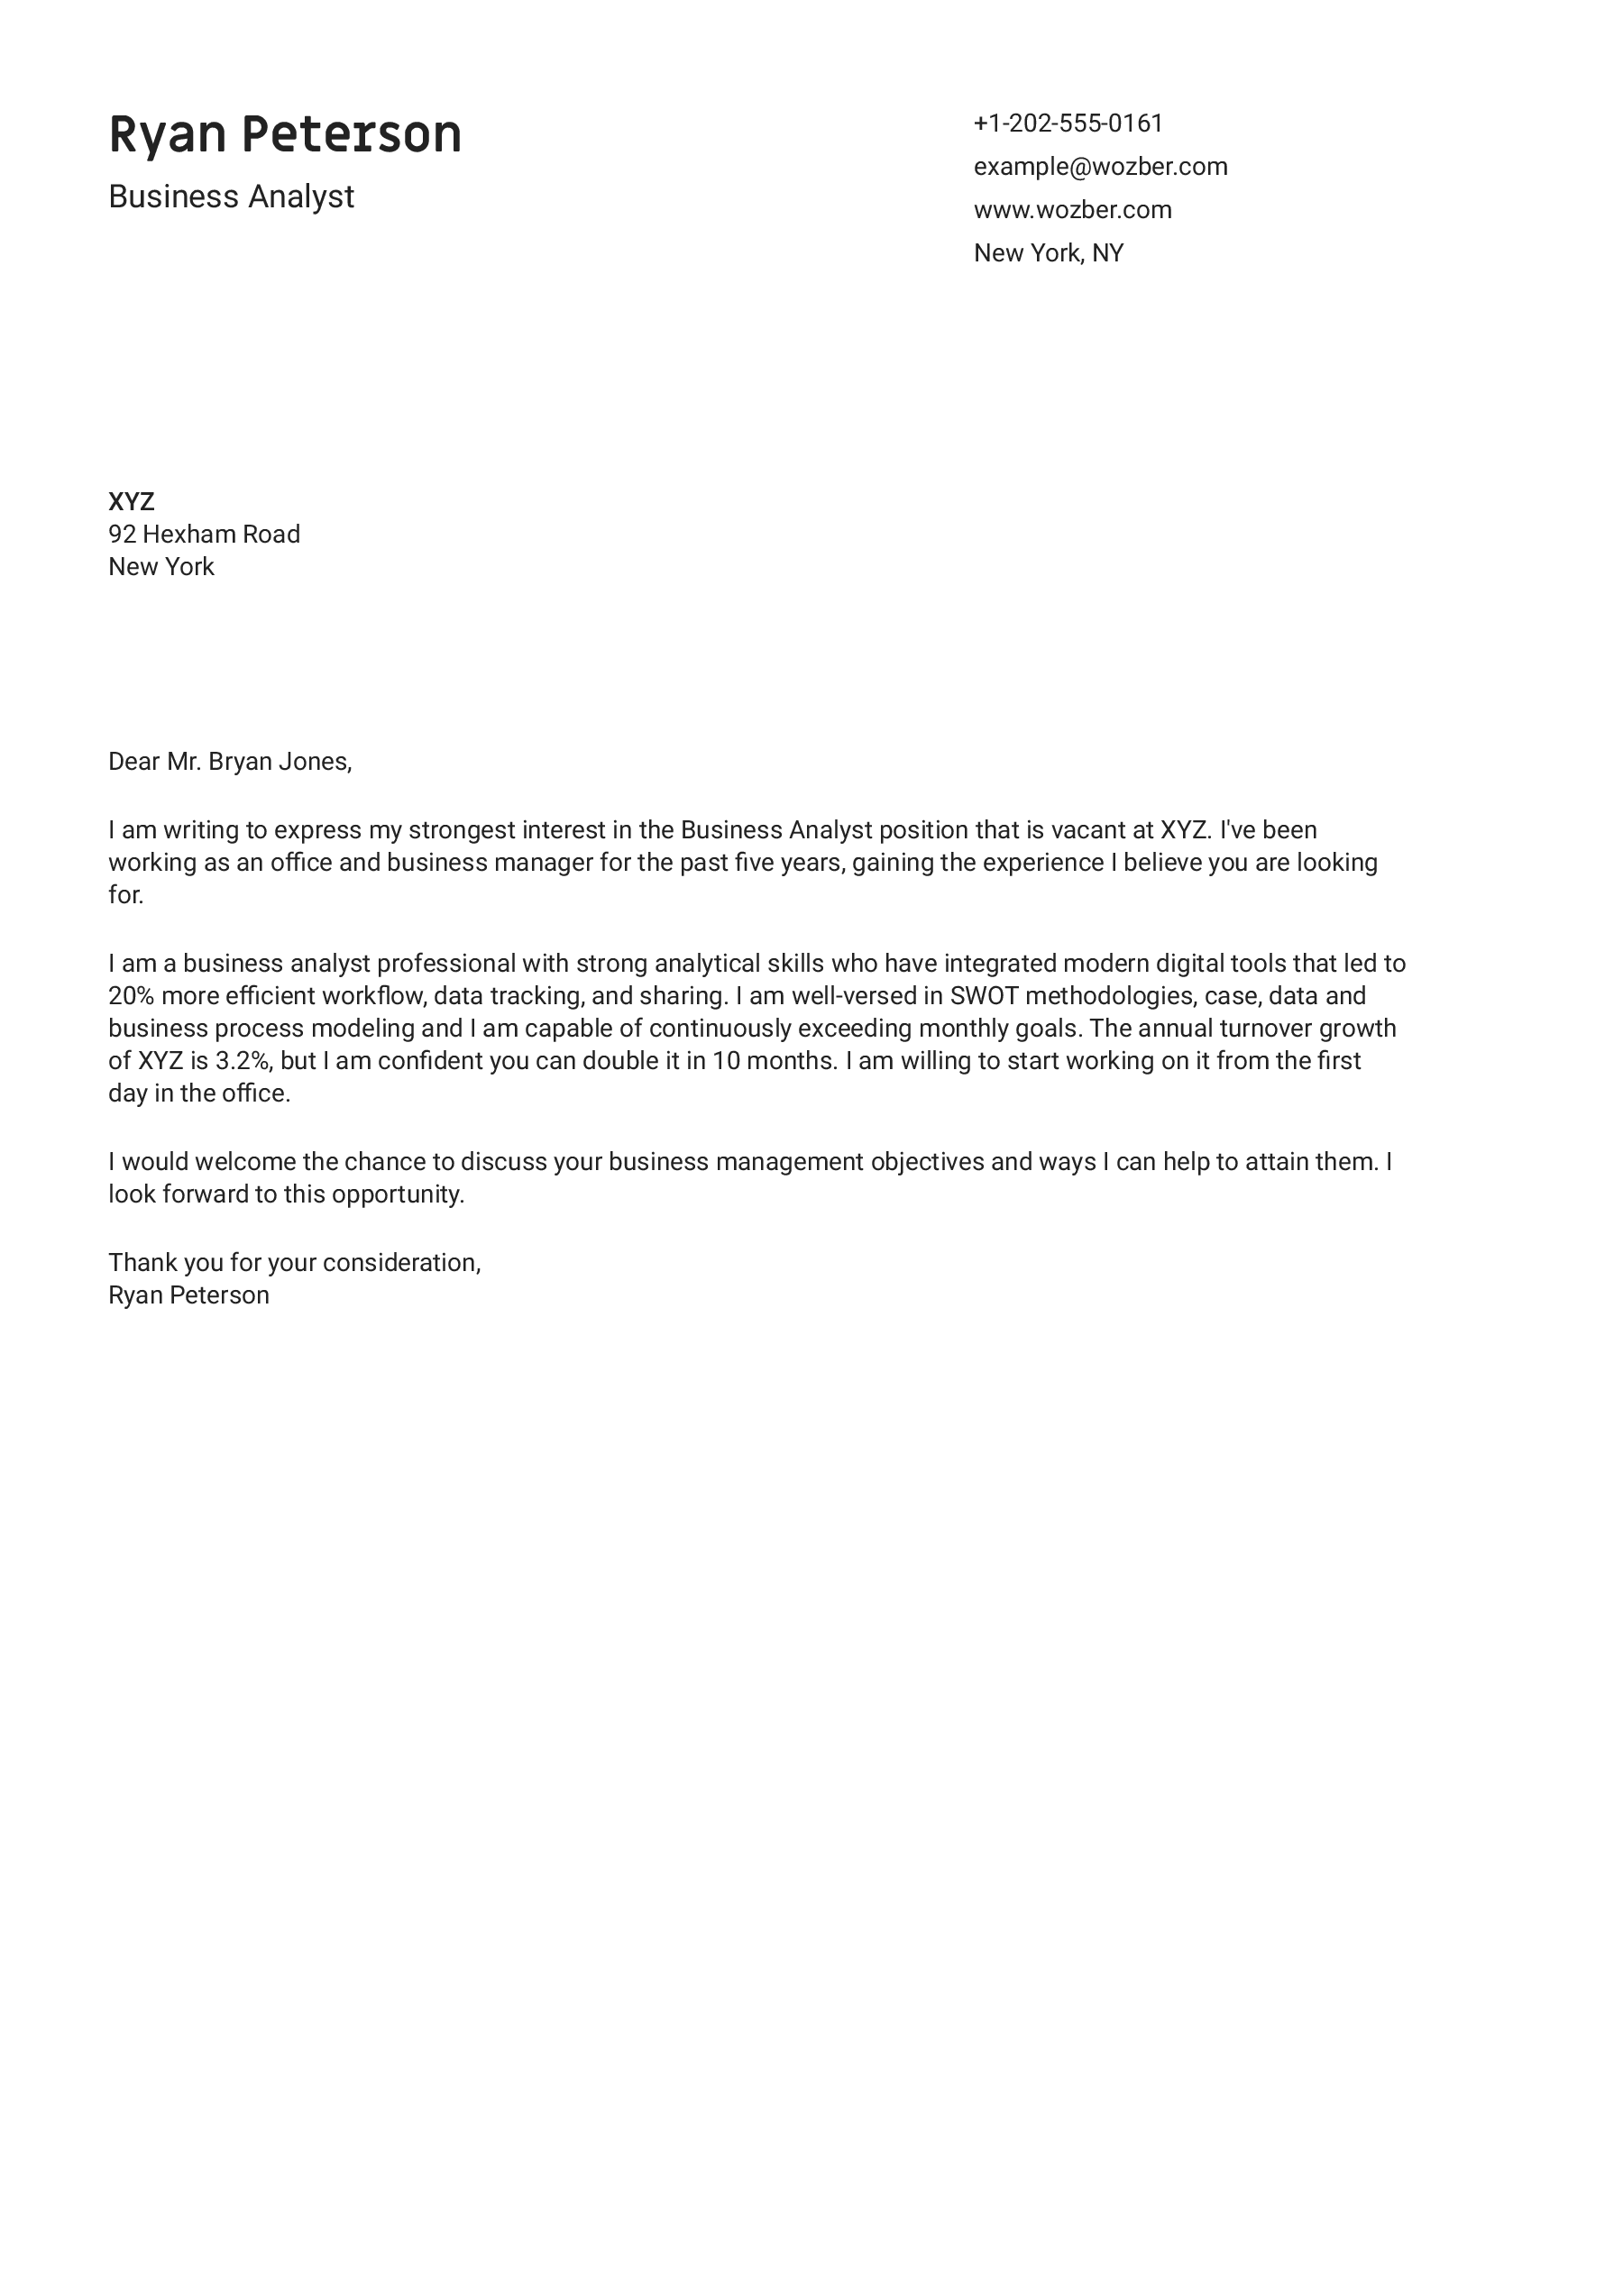 Business analyst cover letter example